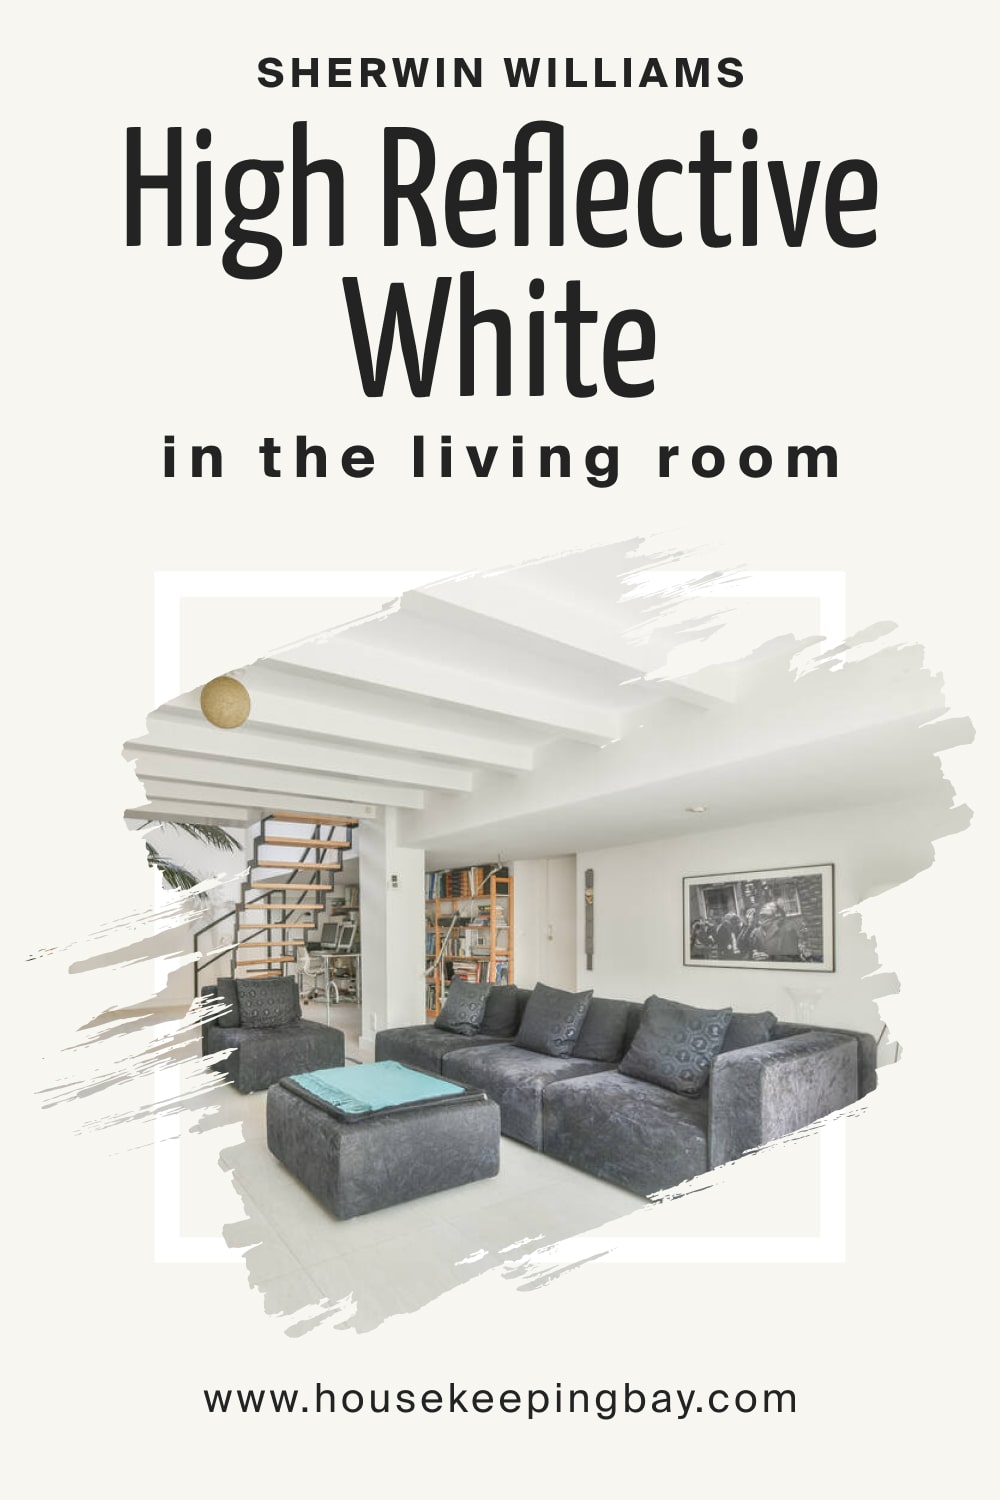 Sherwin Williams. High Reflective White SW 7757 In the Living Room